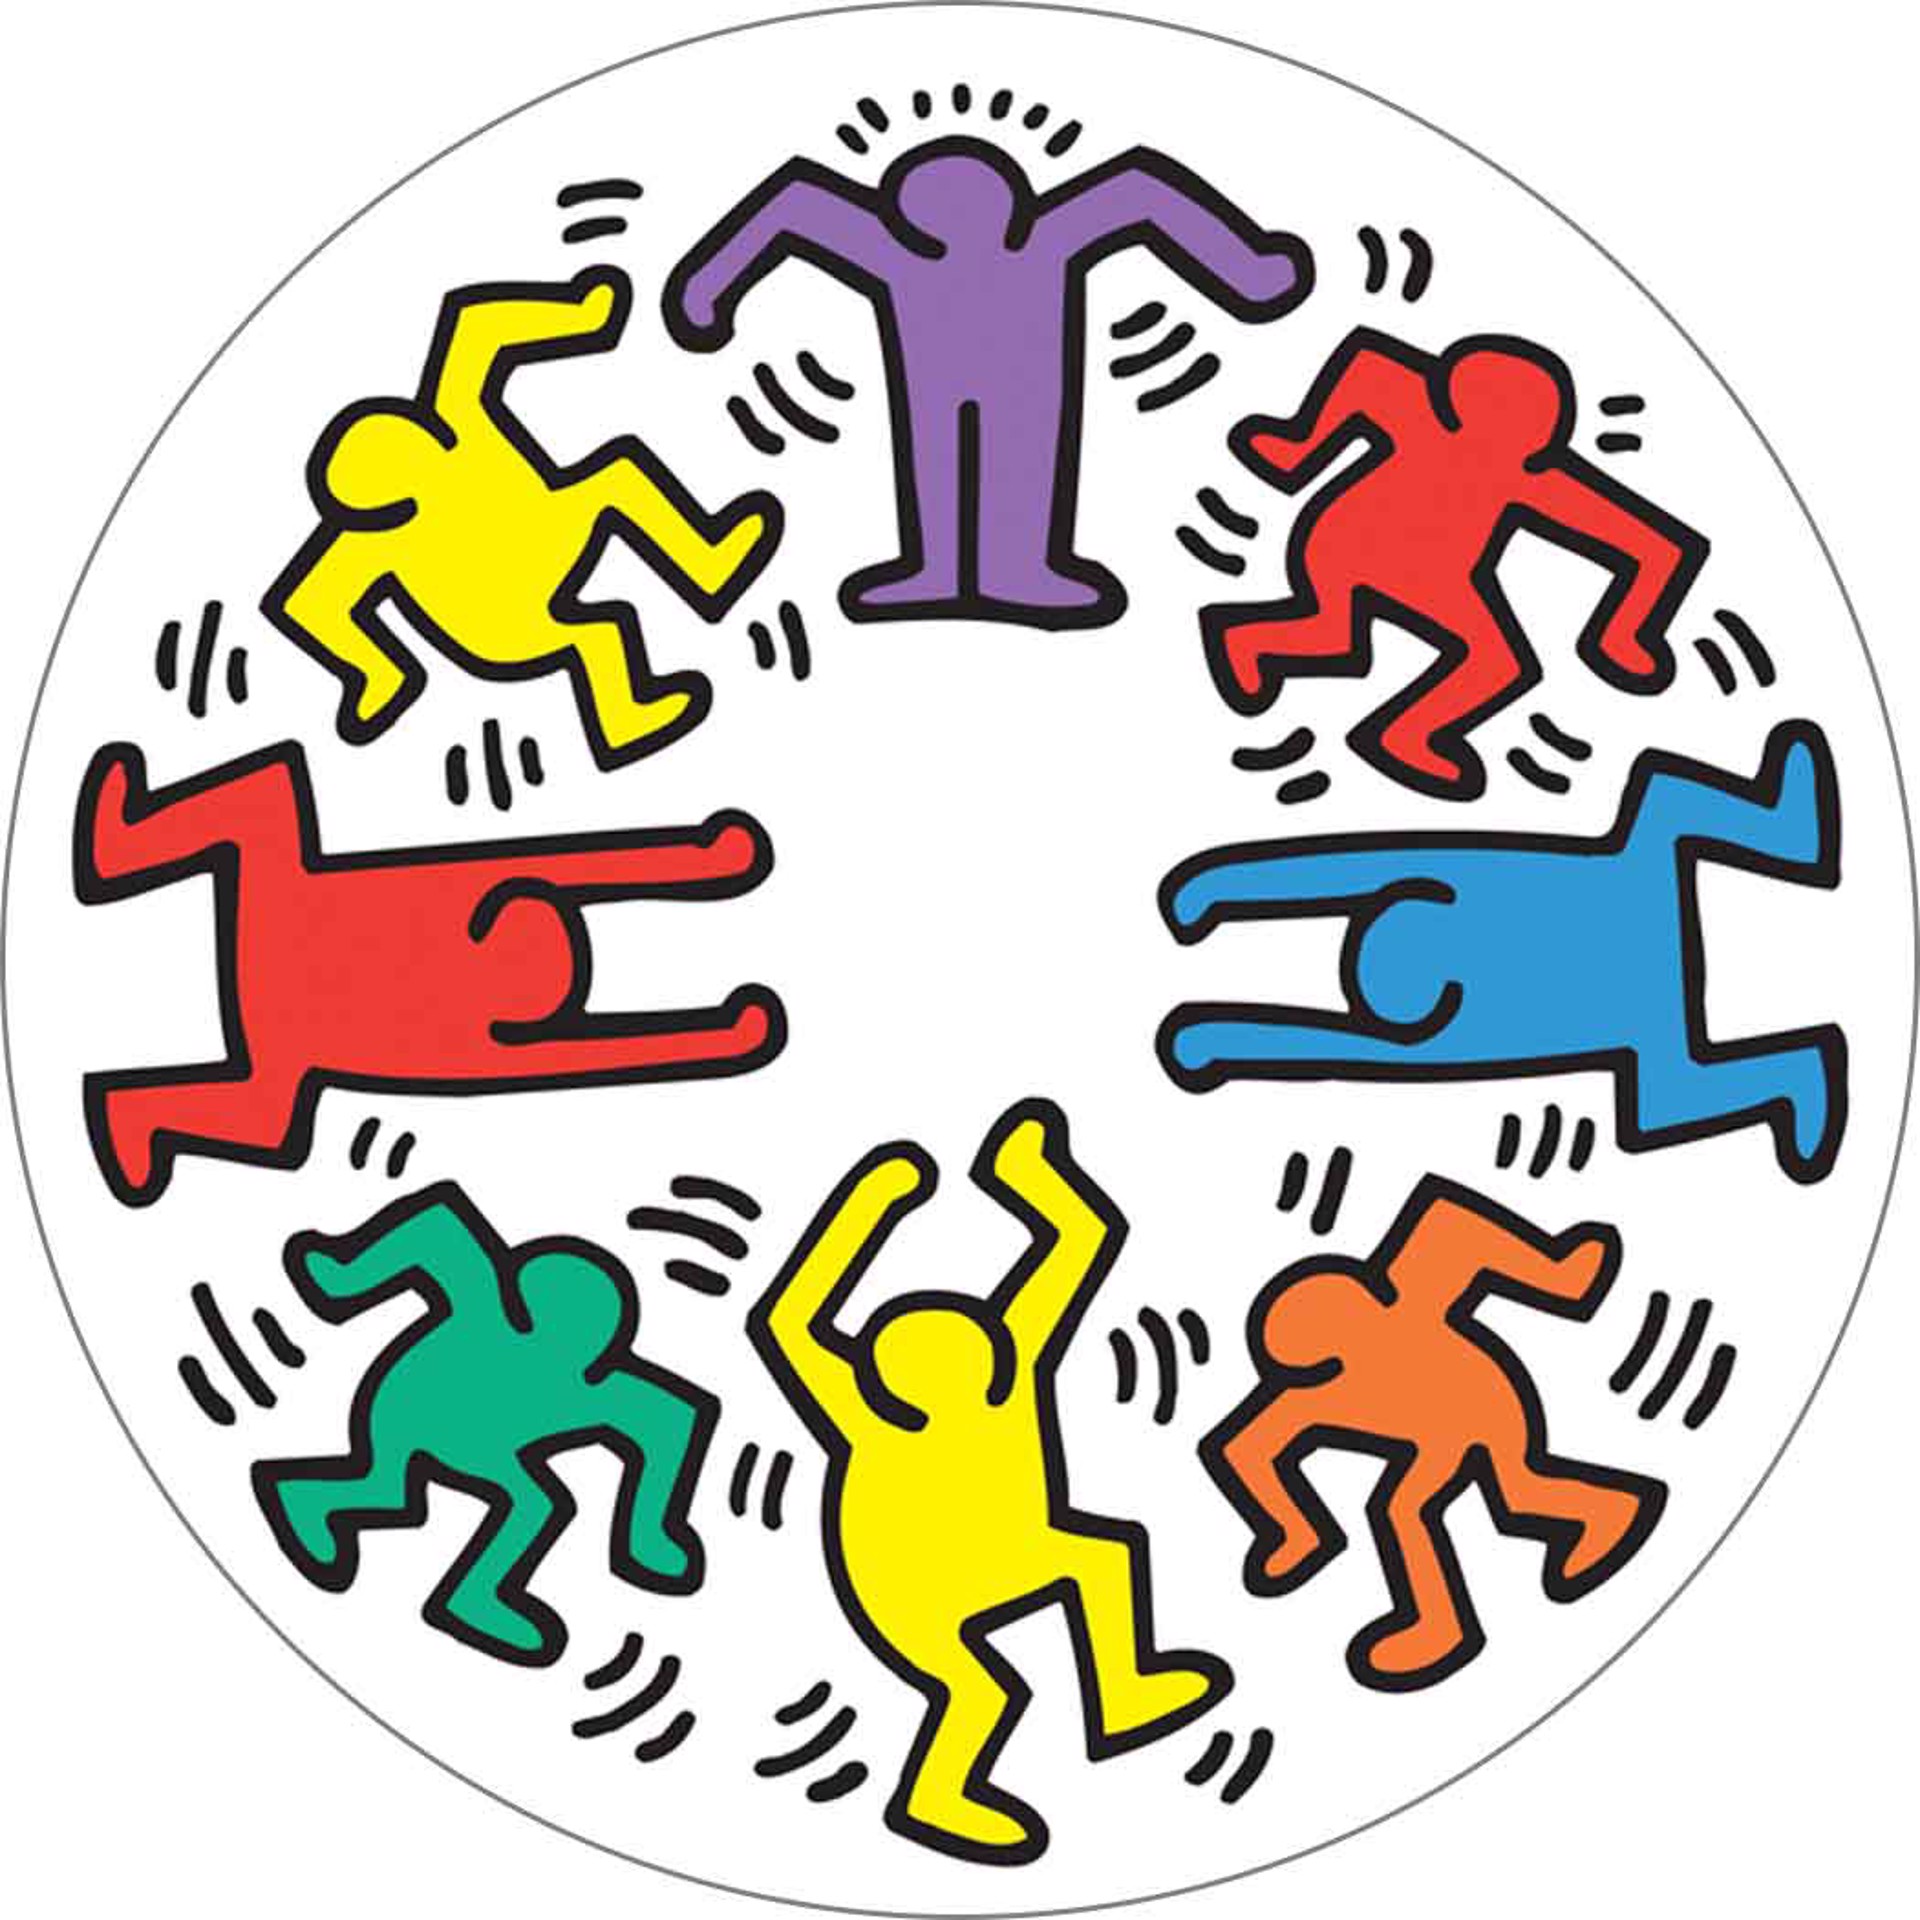 Dancing Figures 2.25 inch Round Magnet  by Keith Haring